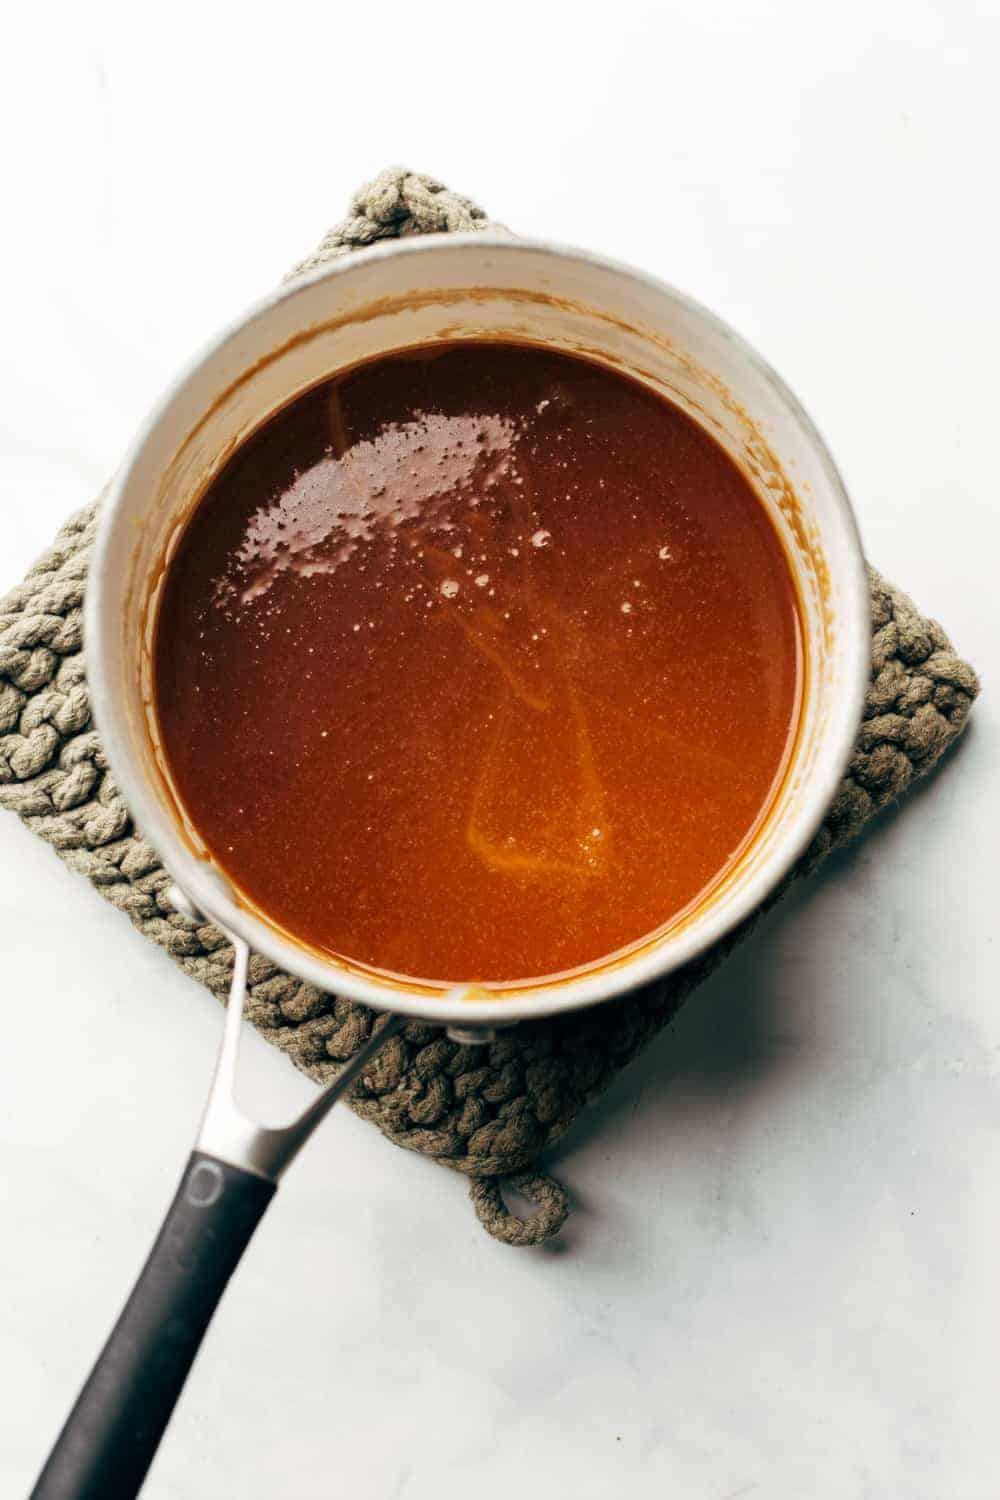 Once you learn how to make caramel sauce, your favorite treat will always be just minutes away